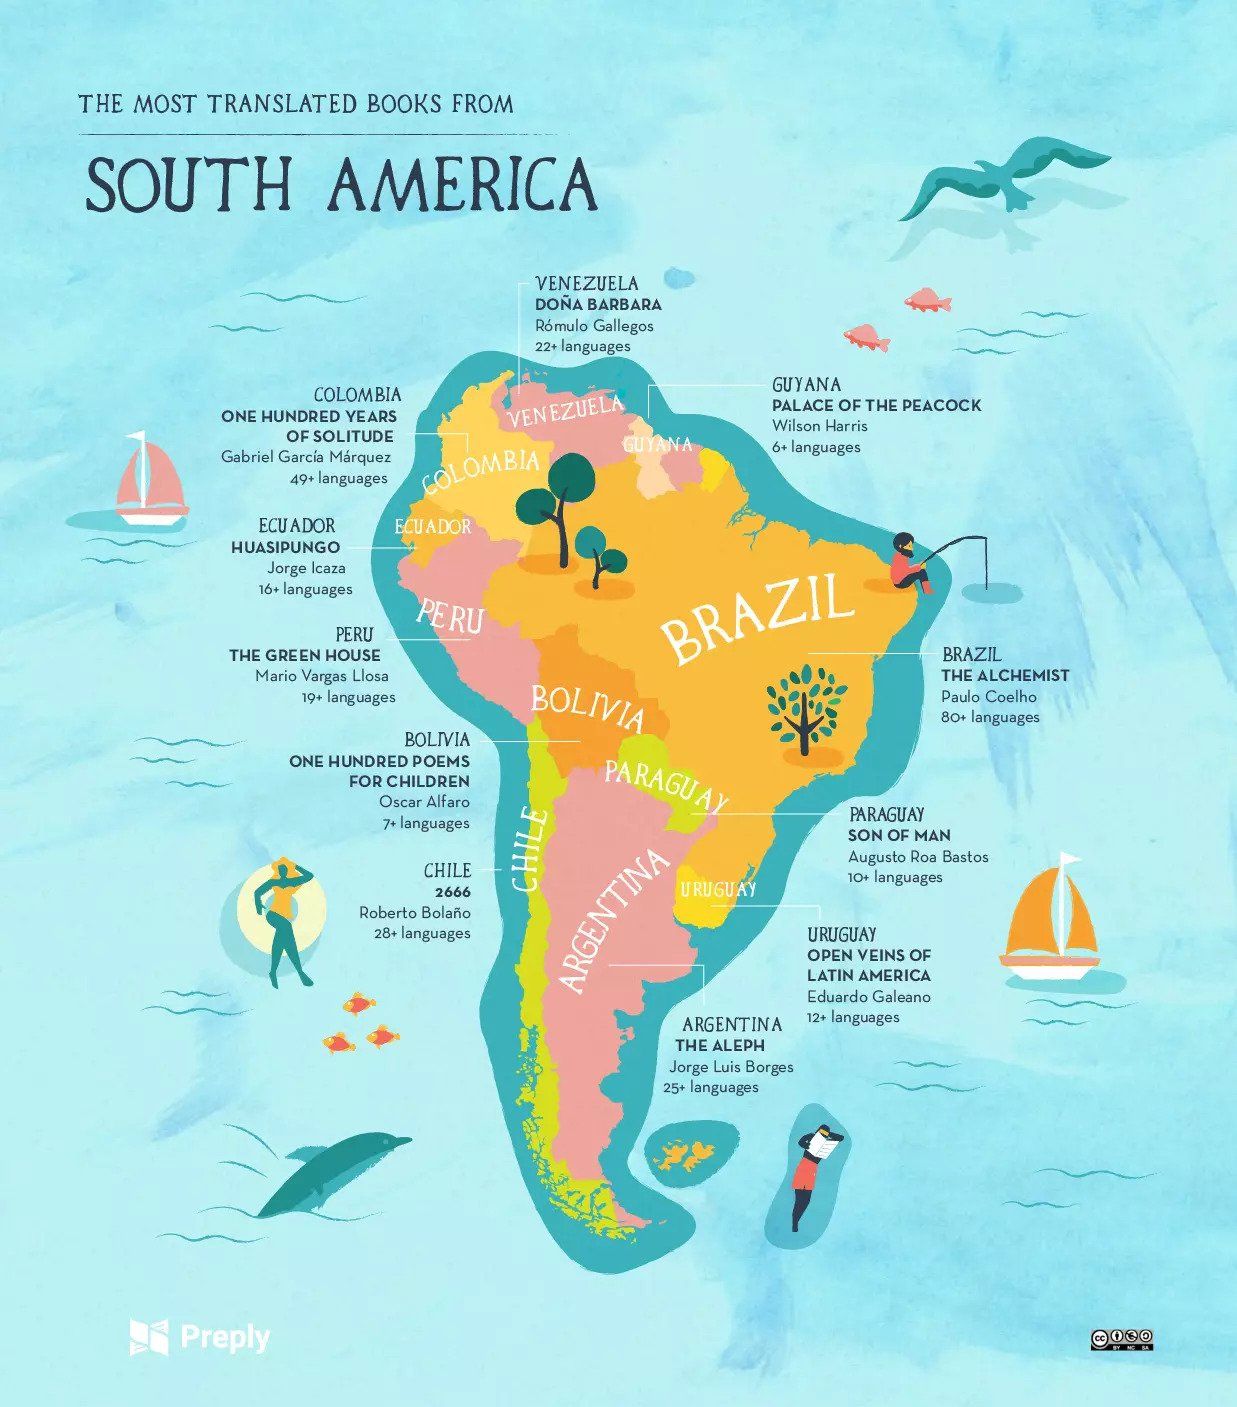 The most translated books from South America map